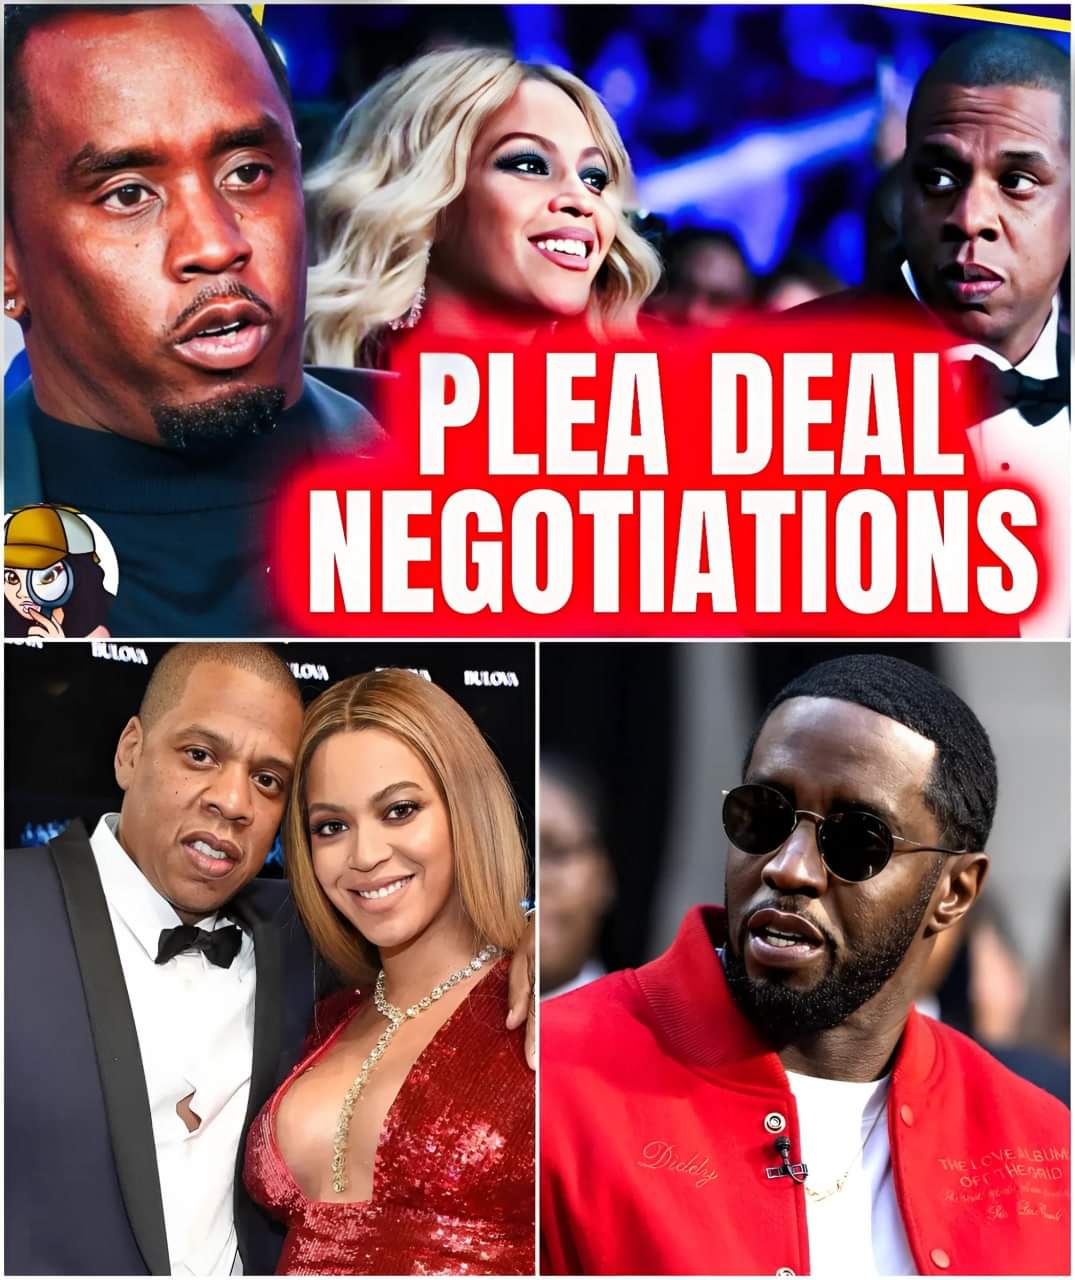 Diddy Let’s The Wolves In On Beyoncé & Jay Z, Feds Want BIG FISH, Diddy DESPERATE To Beat Charges And it All Falls Down